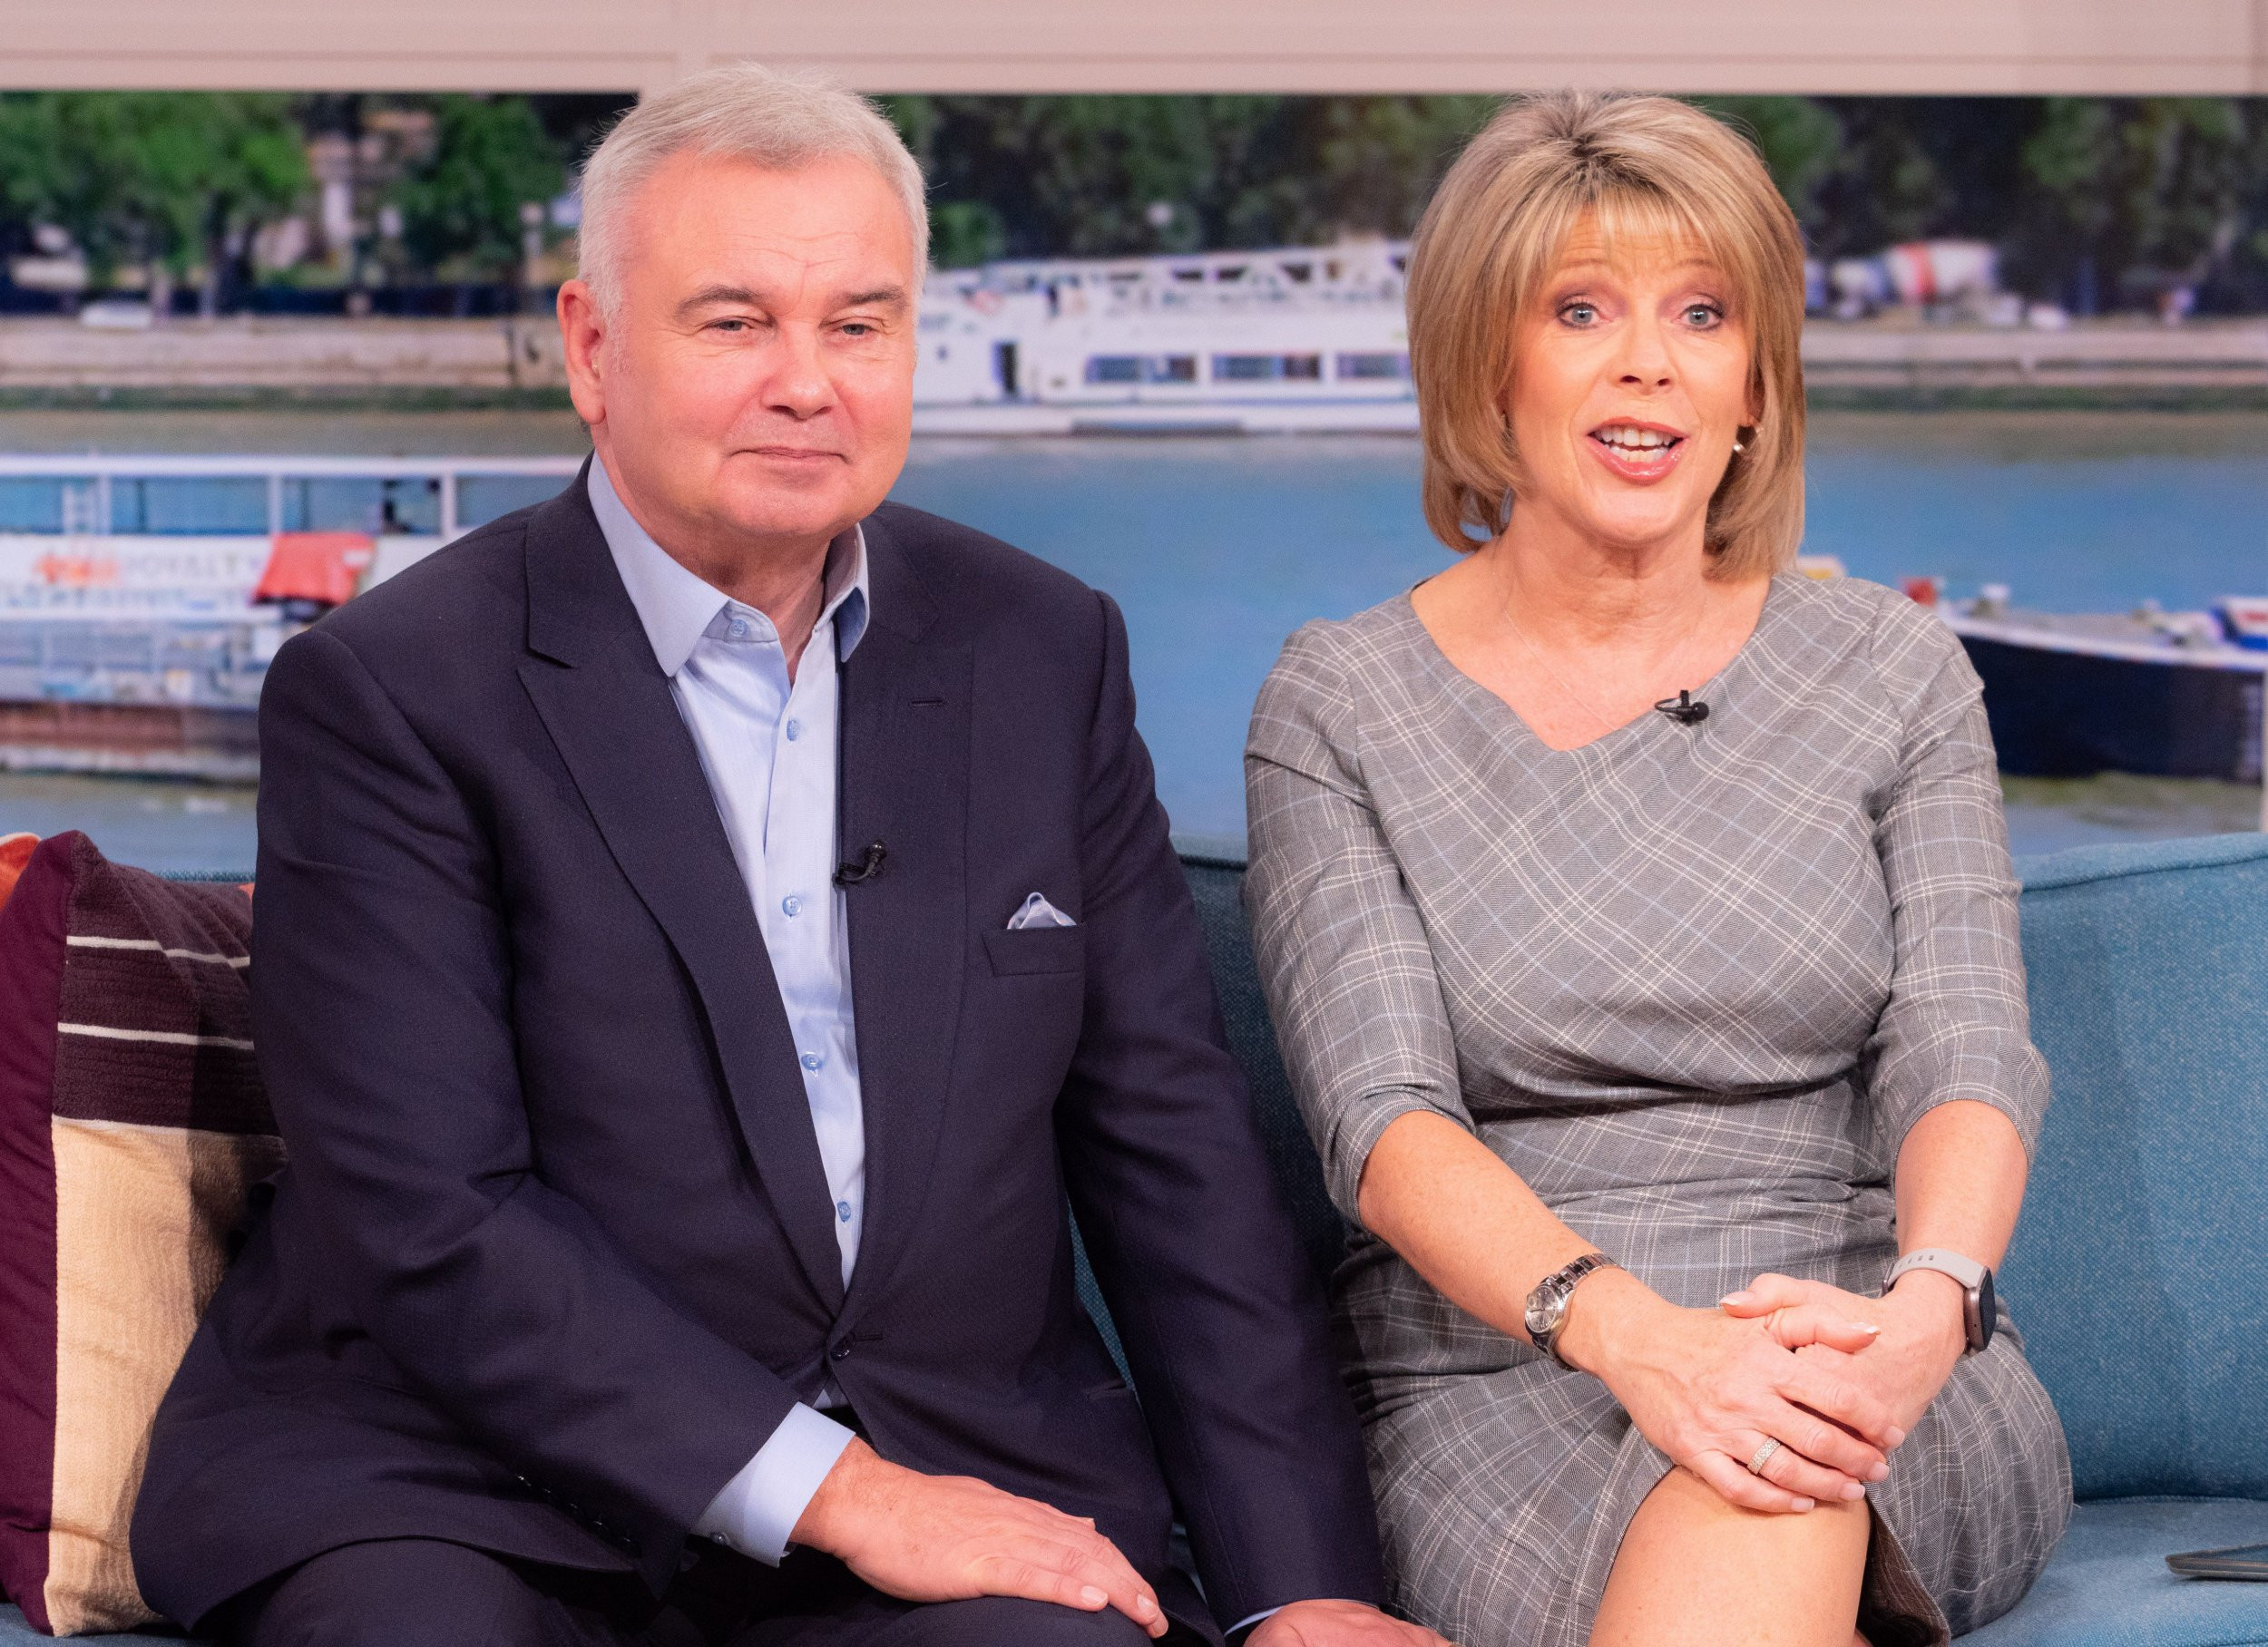 Ruth Langsford From This Morning rushes for her mum after she suffers a Tragic fall!